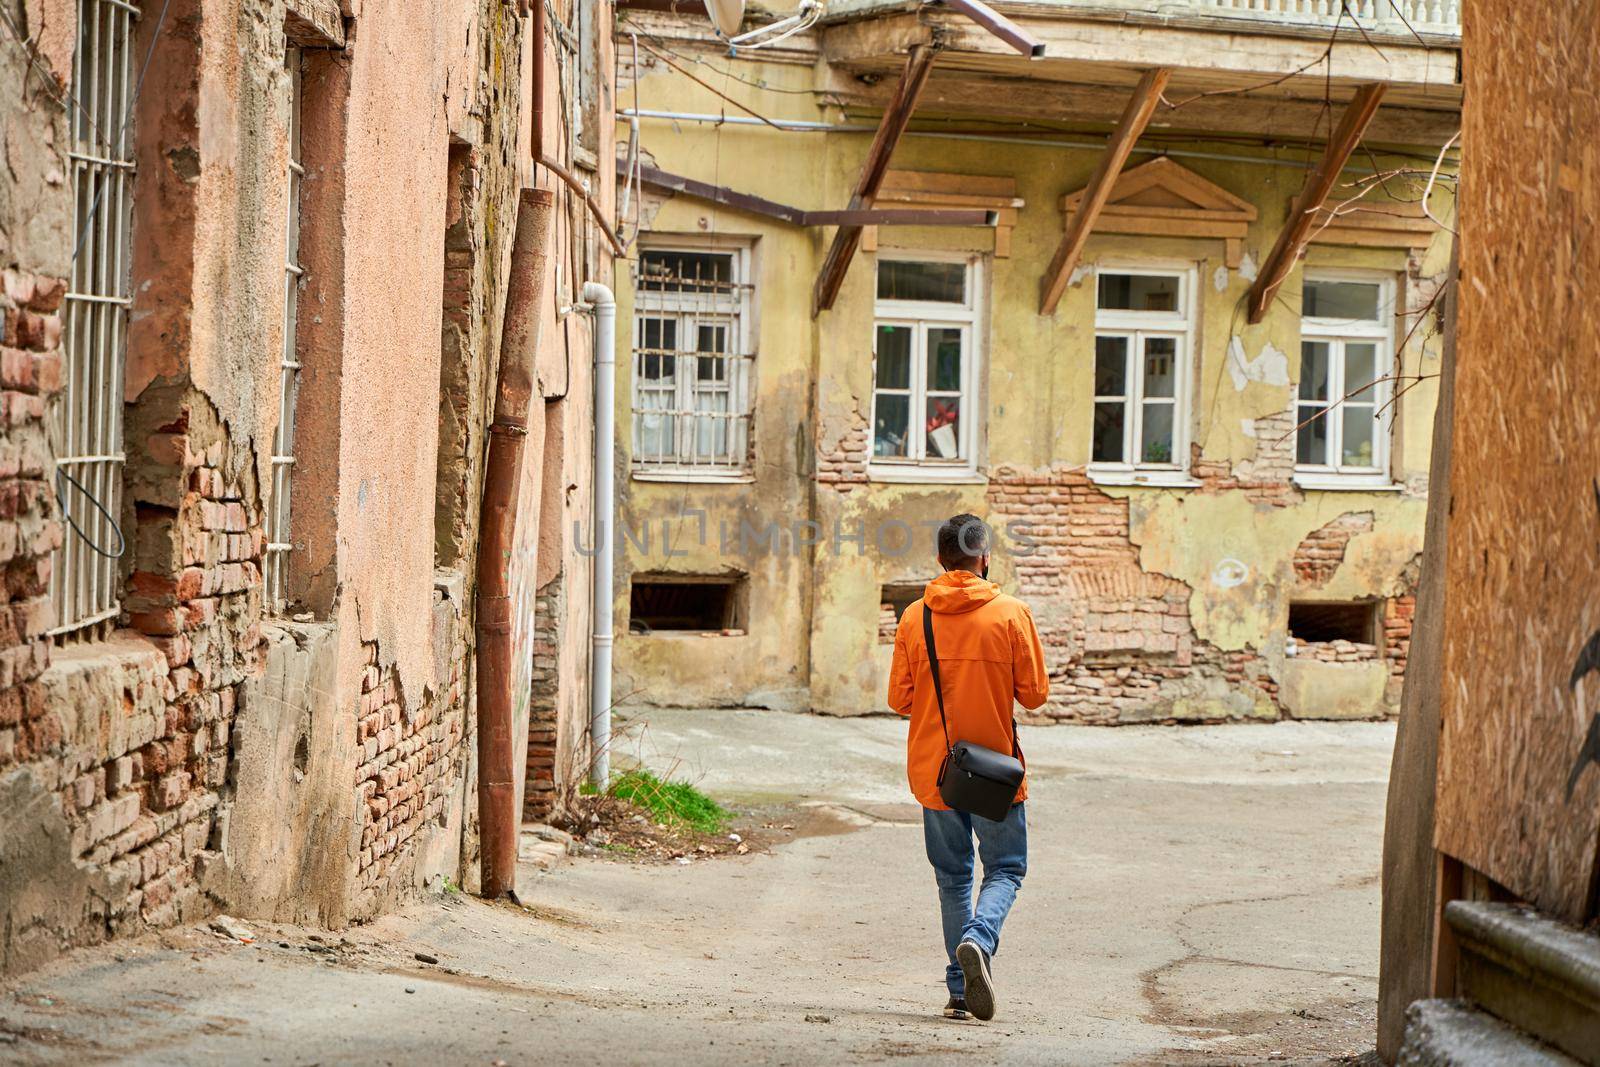 A lonely guy walks in the old part of the city between dilapidated houses.